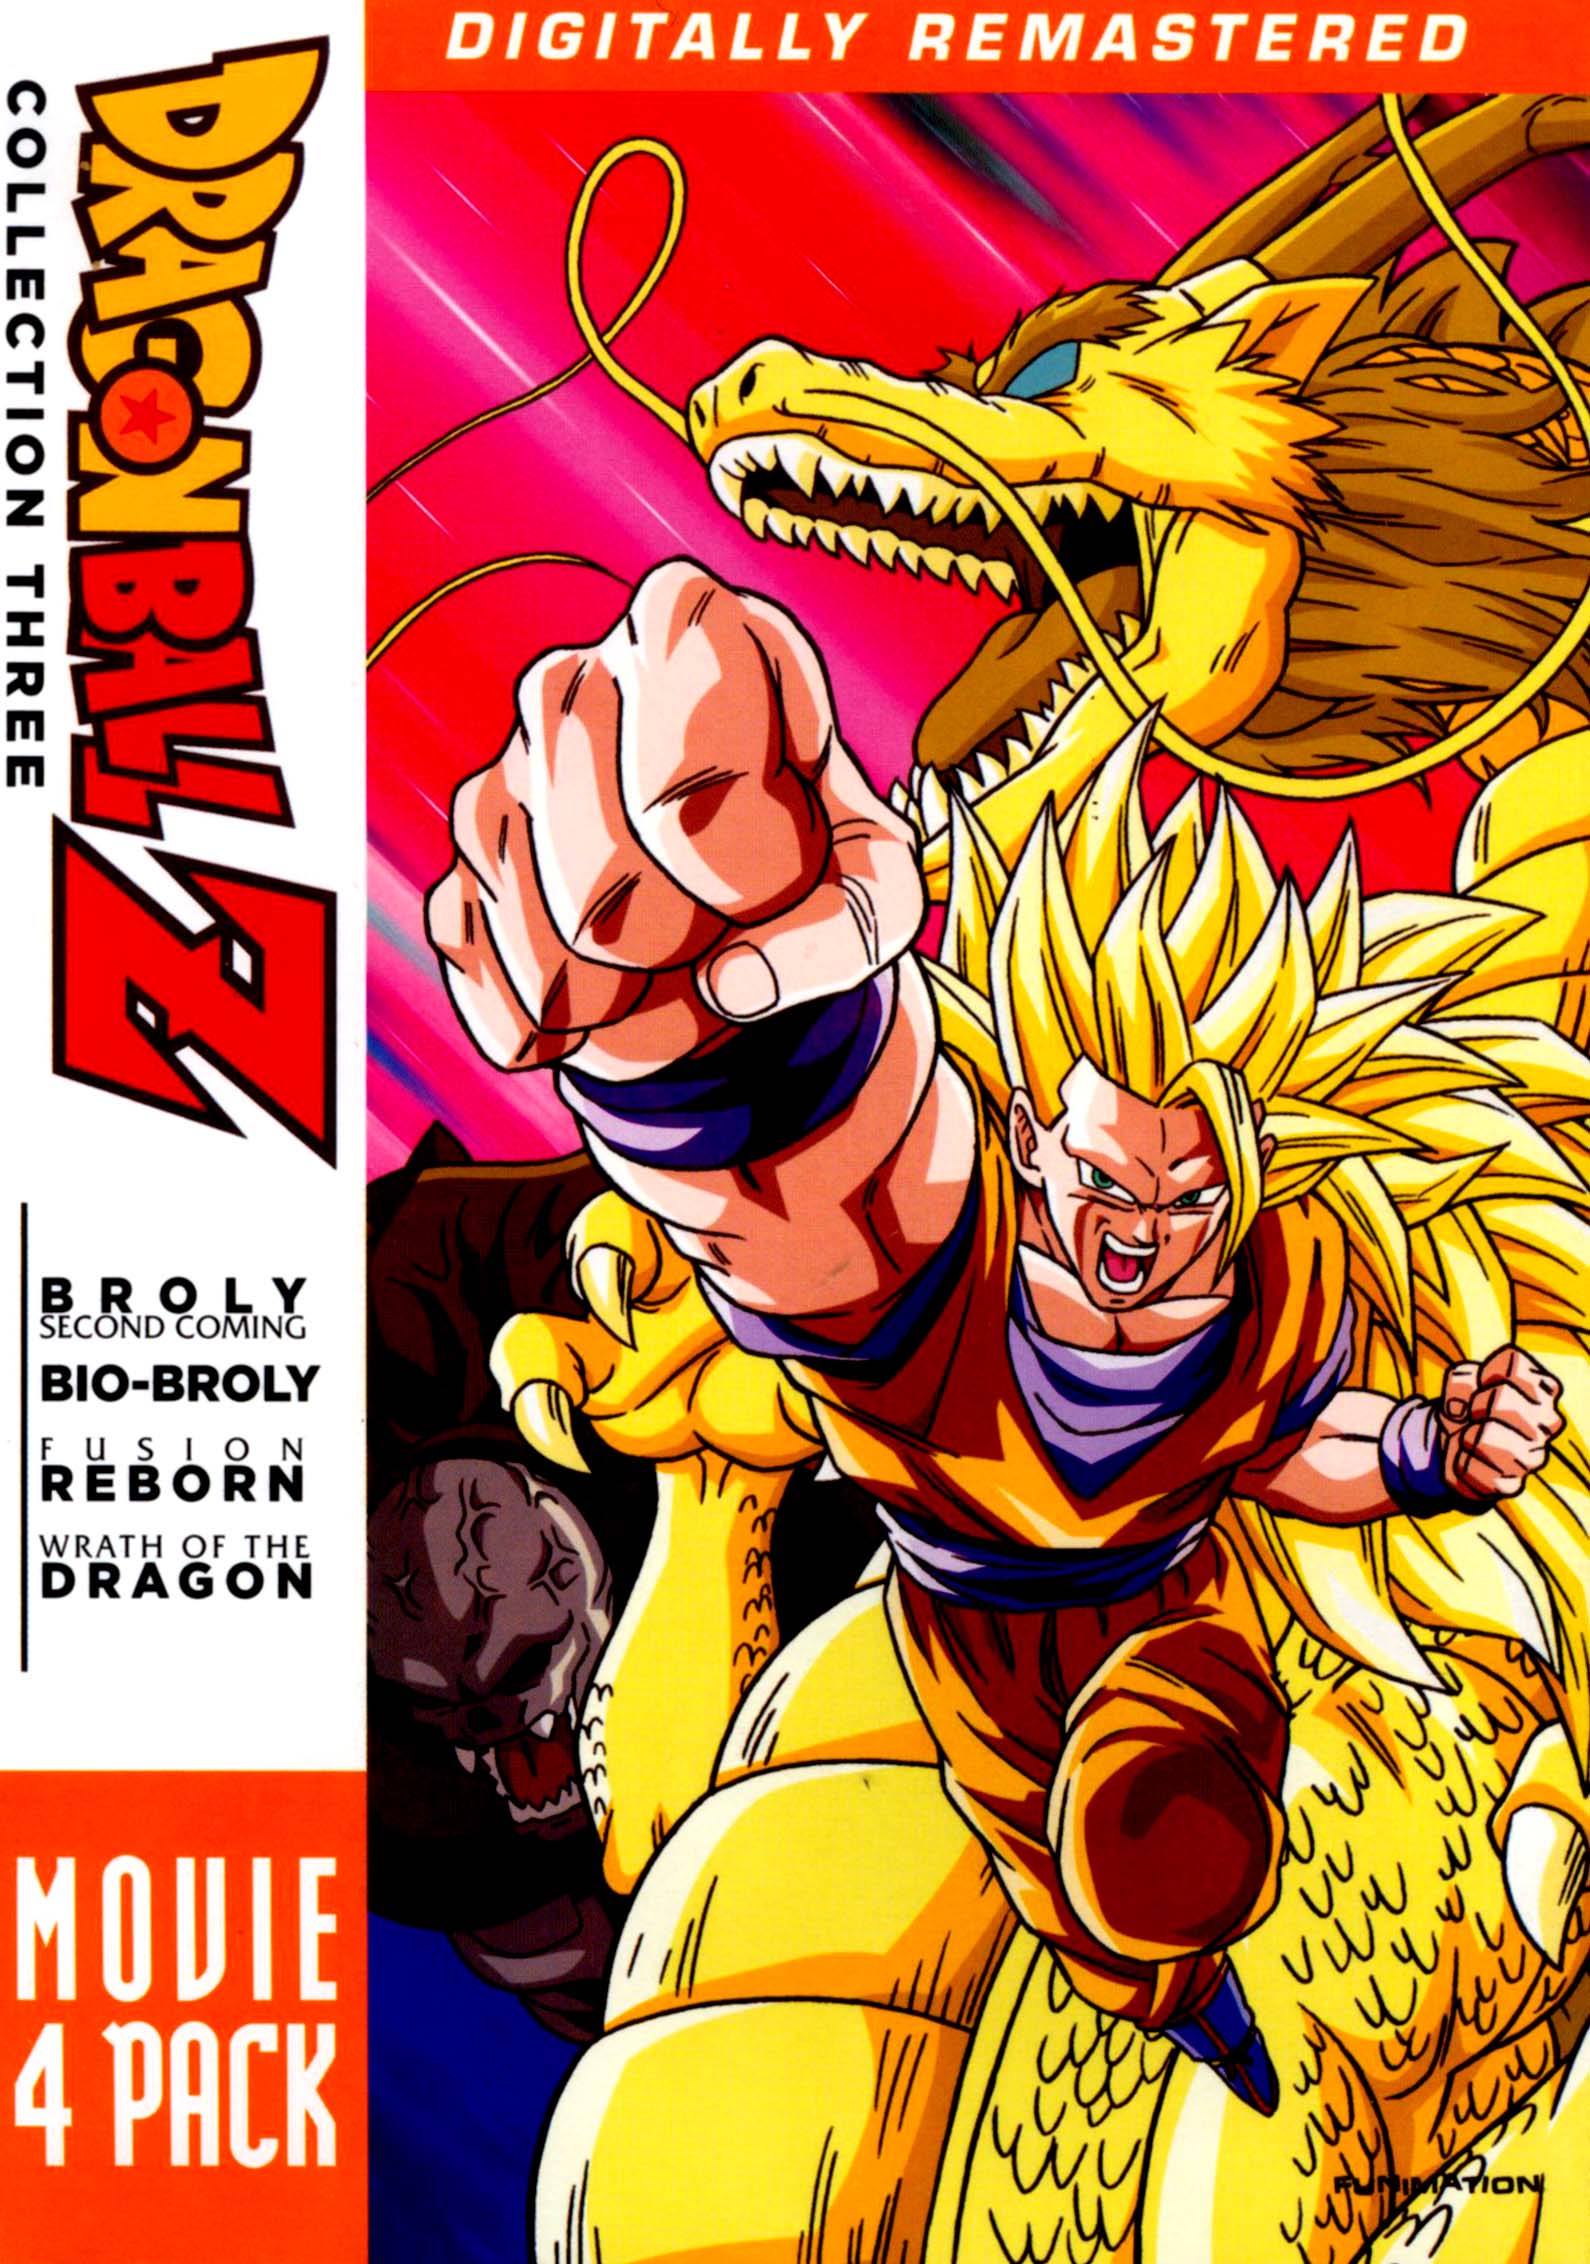 DragonBall Z: Movie 4 Pack Collection Three [4 Discs] [DVD] - Best Buy